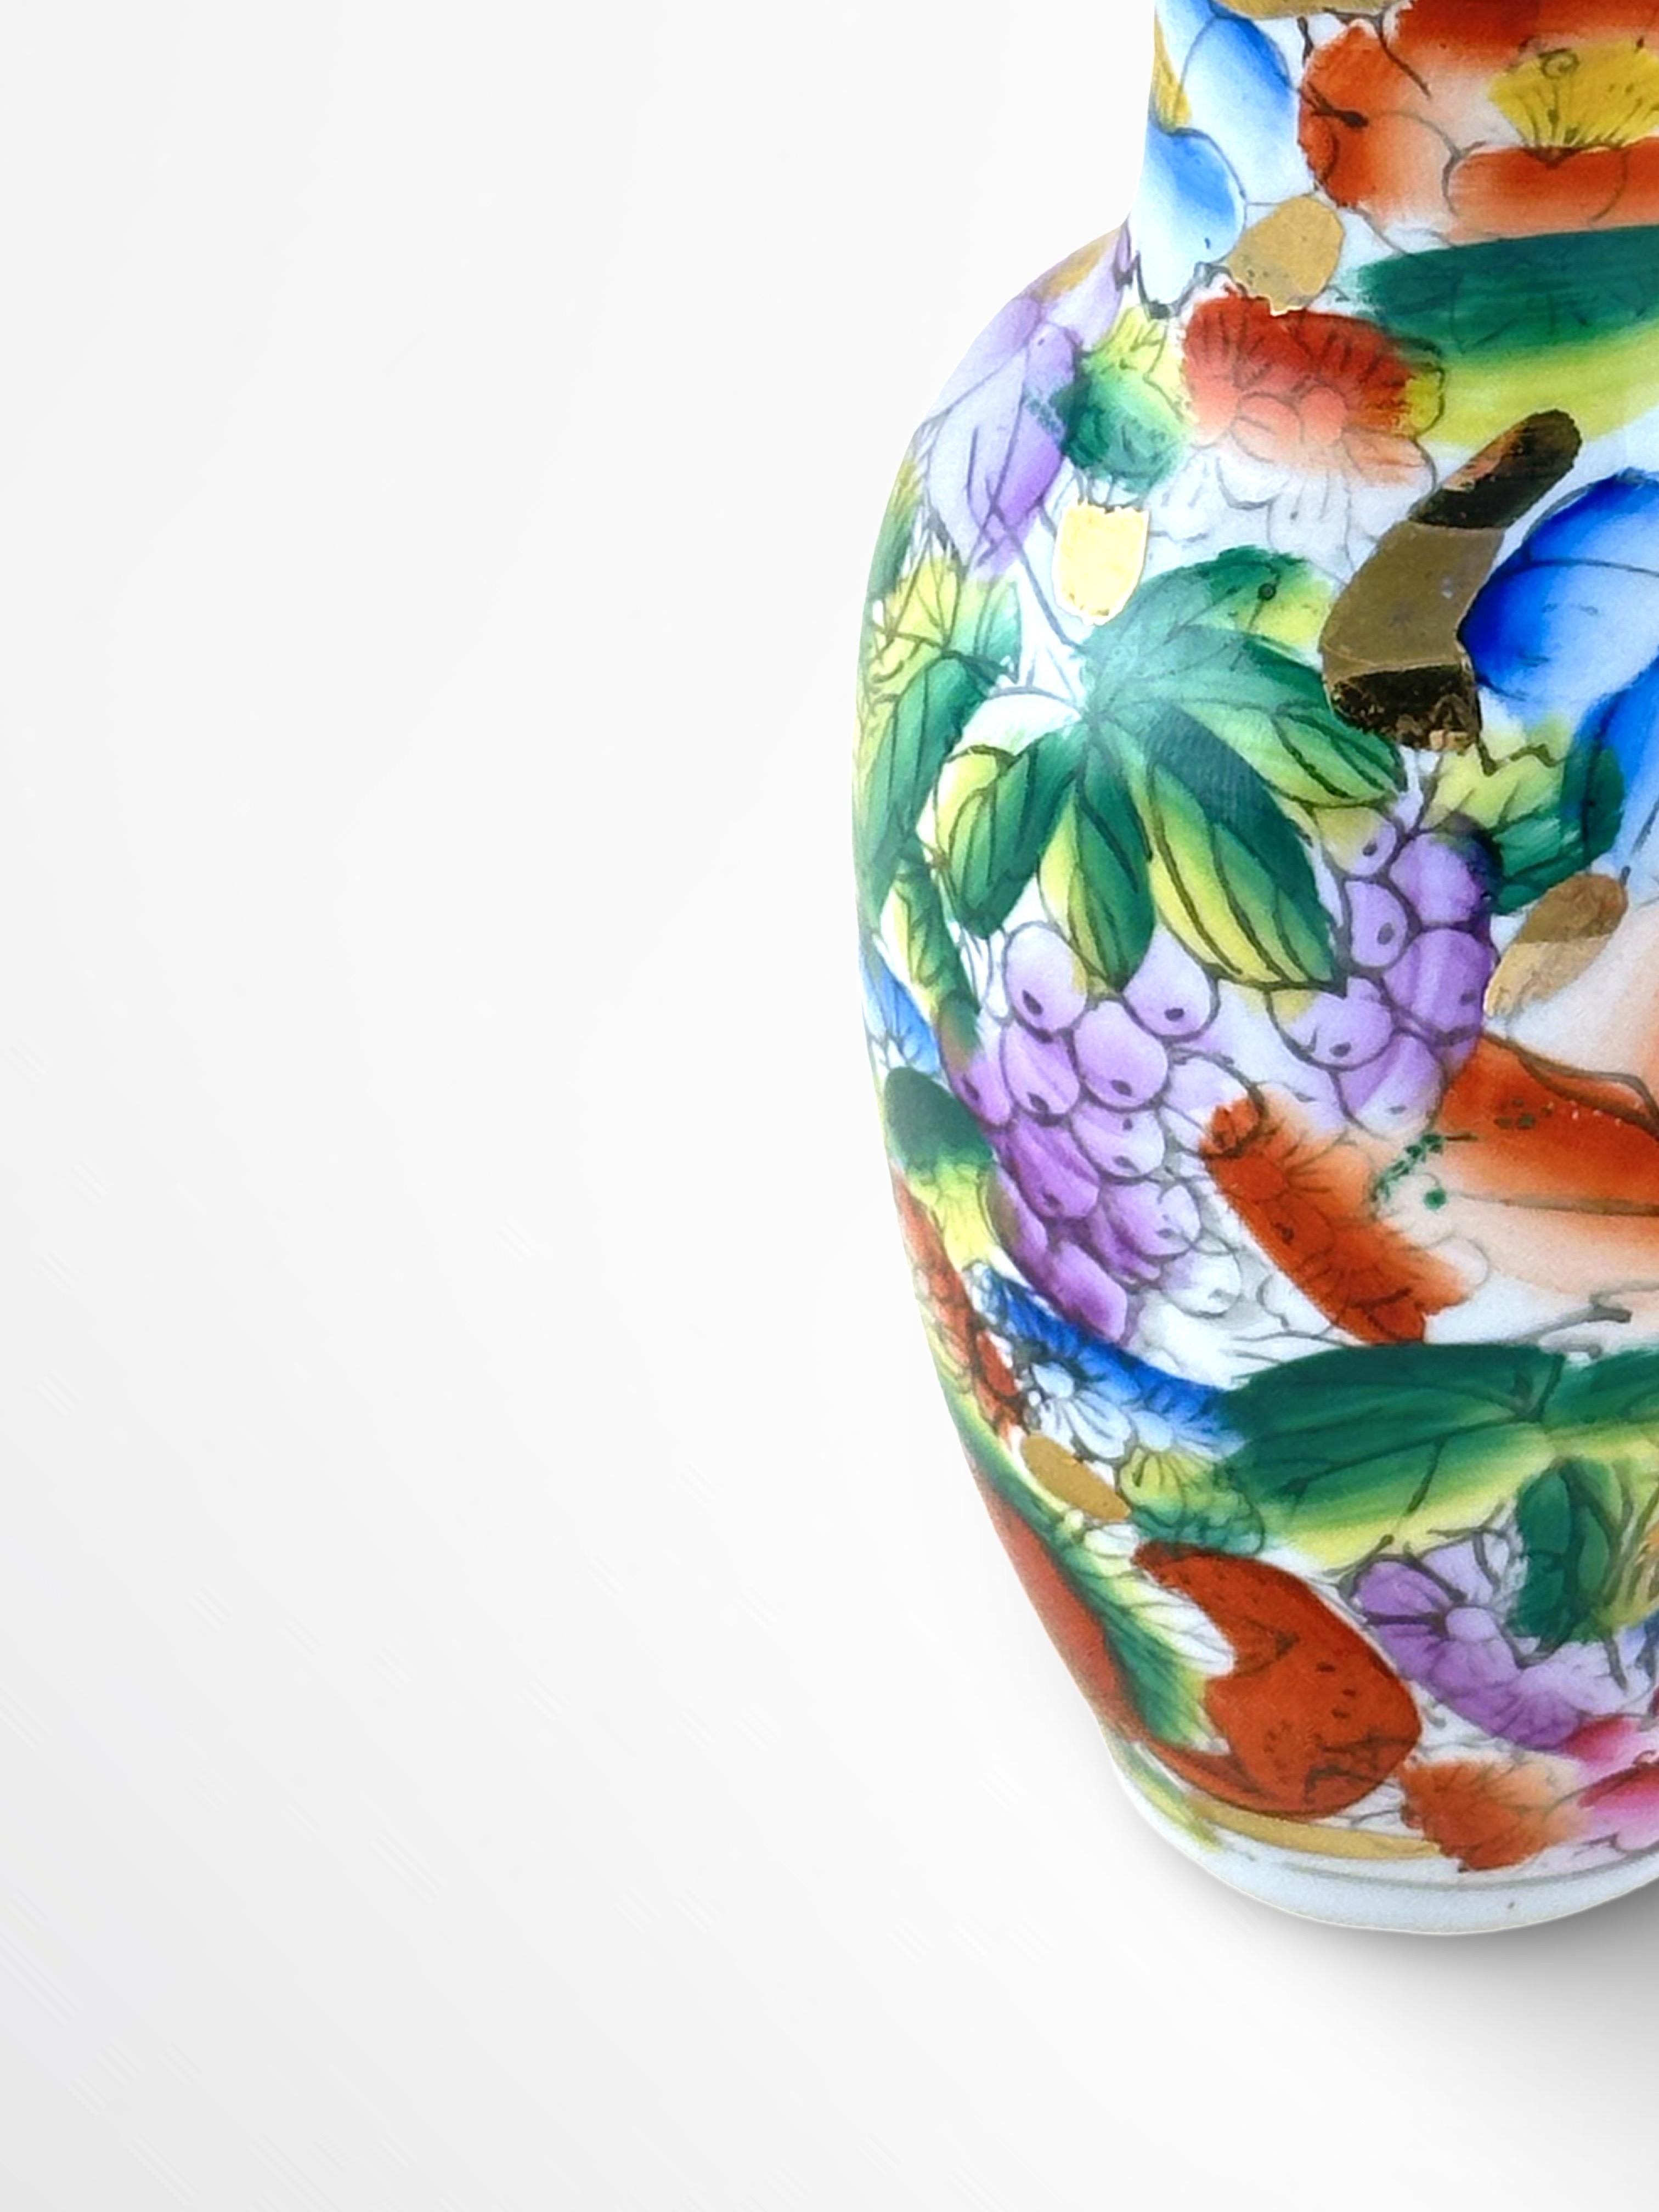 A small porcelain baluster vase, handcrafted in China during the mid-20th century, specifically between the 1950s and 1960s

Finely decorated and displaying a vibrant scene of flowers nestled against a contrasting bed of lush green foliage. Bright